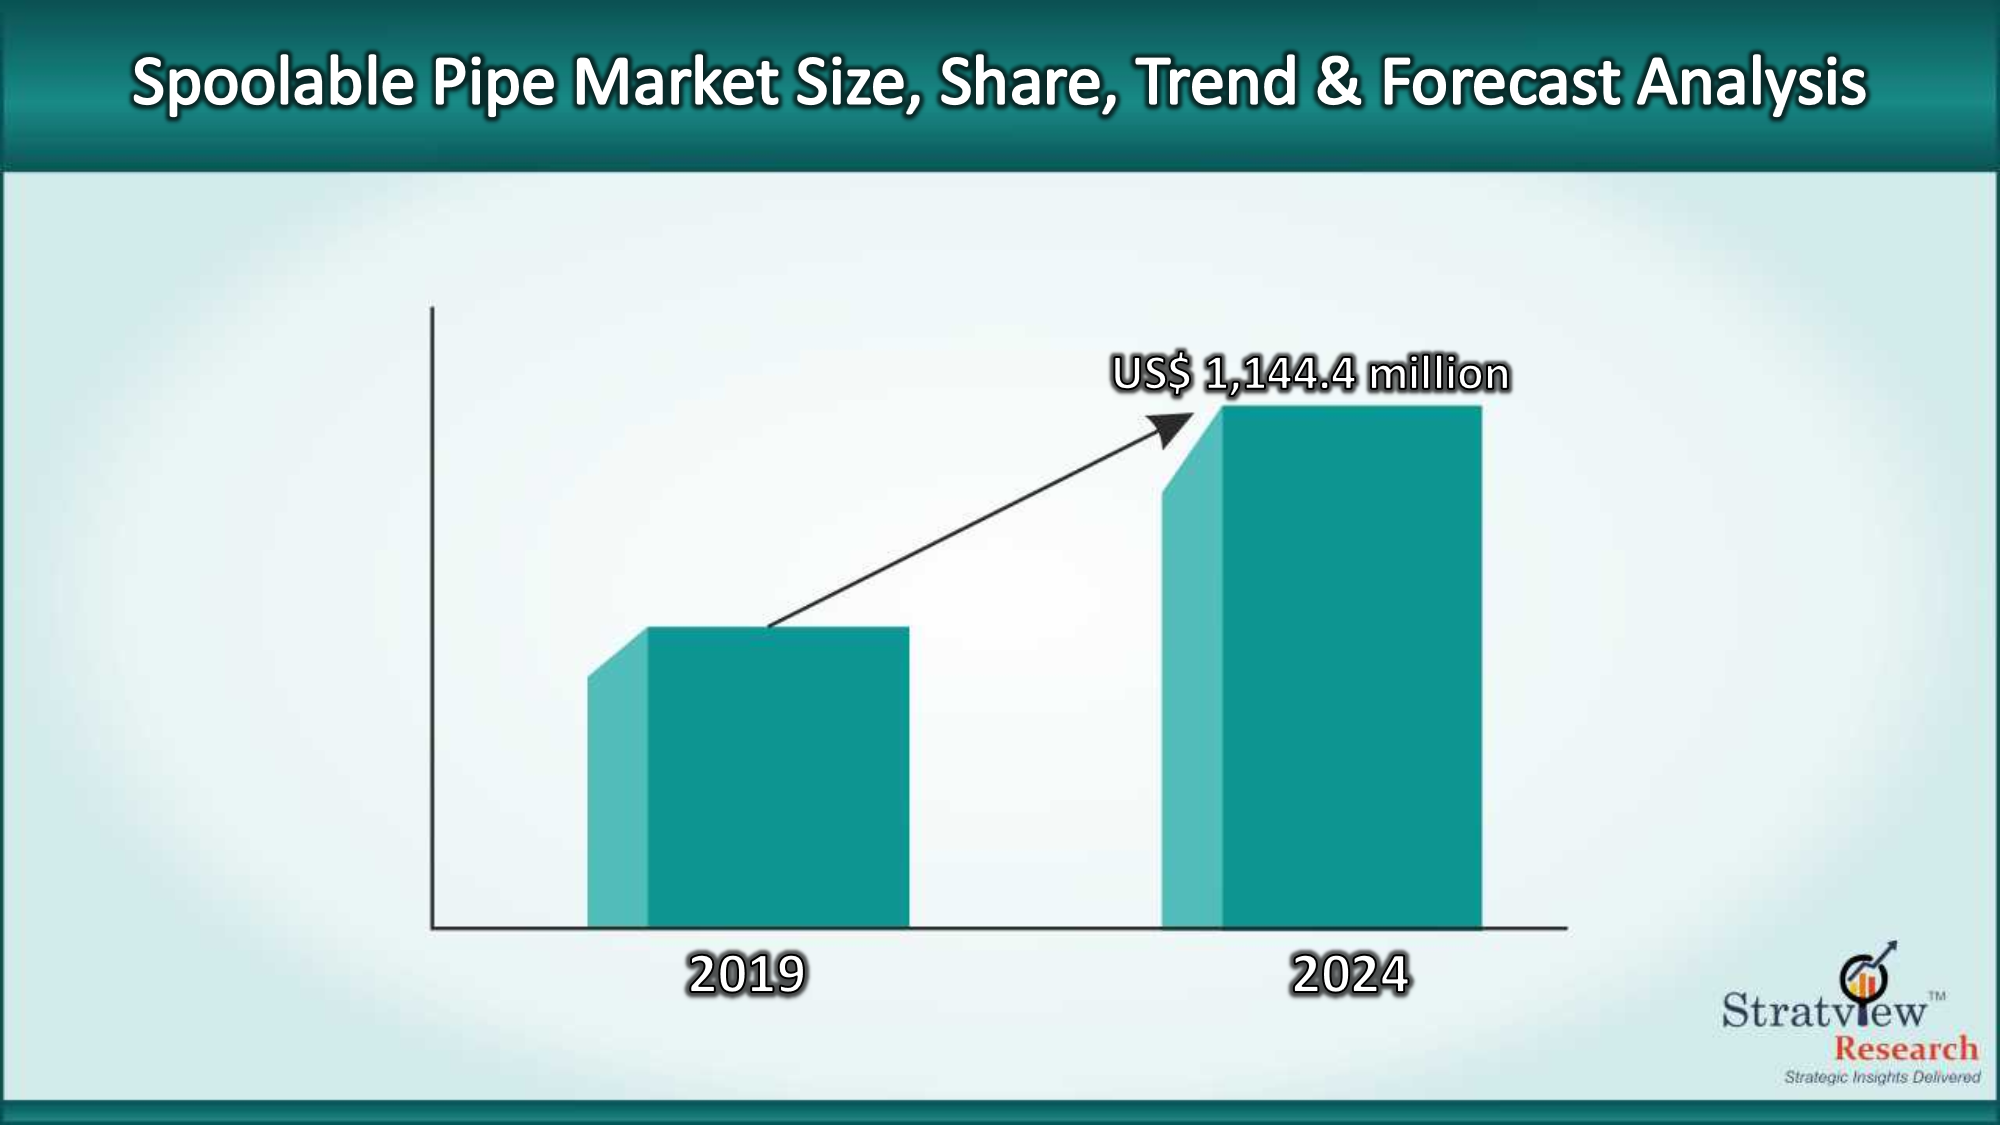 Spoolable Pipe Market to grow beyond US$ 1,144.4 million by 2024